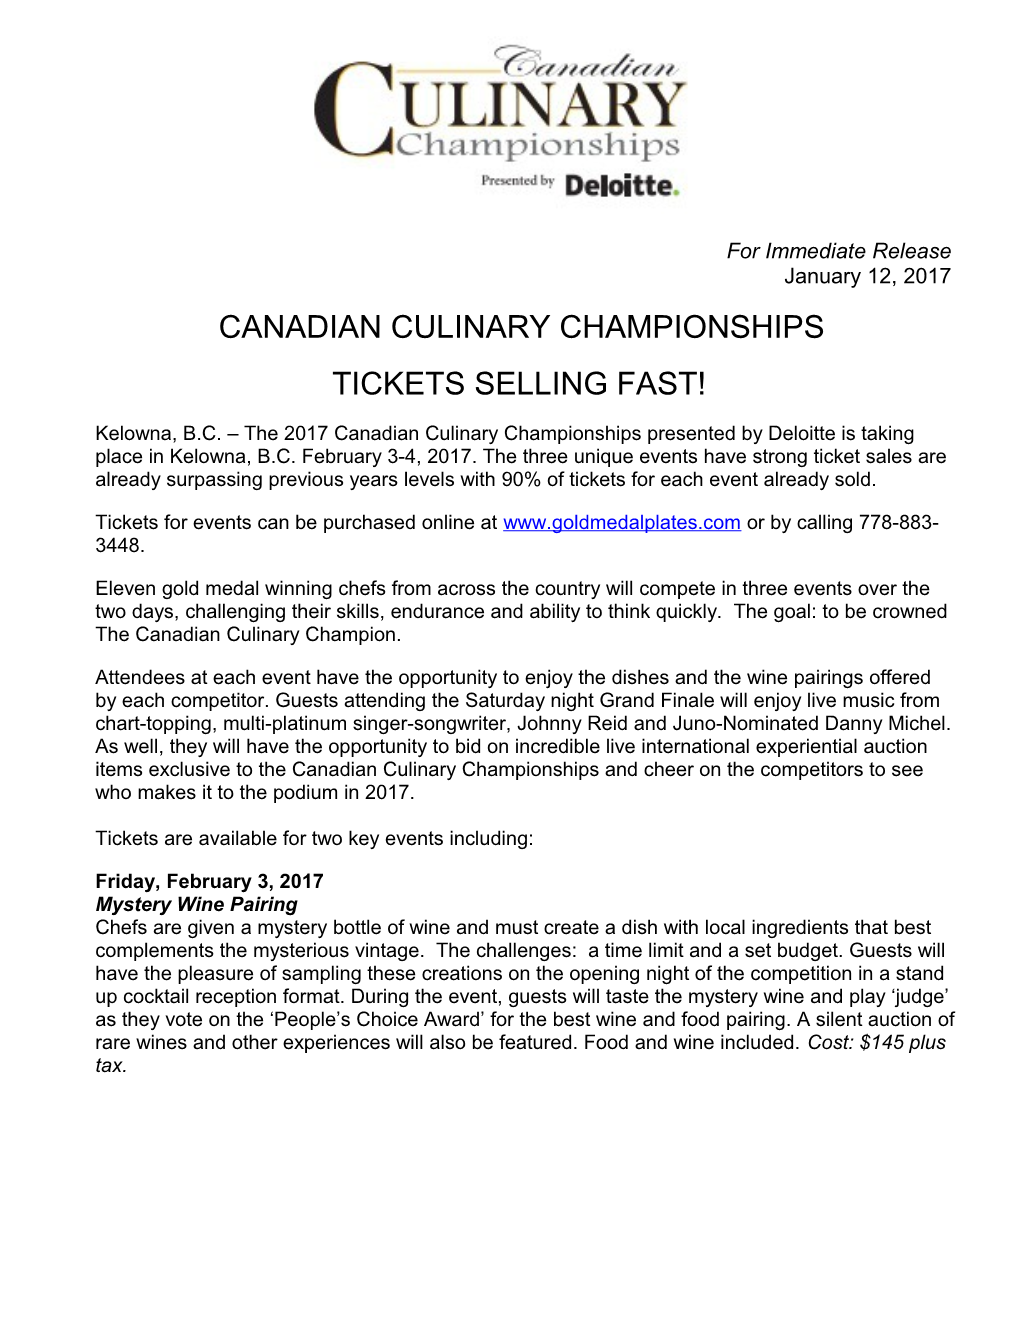 Canadian Culinary Championships